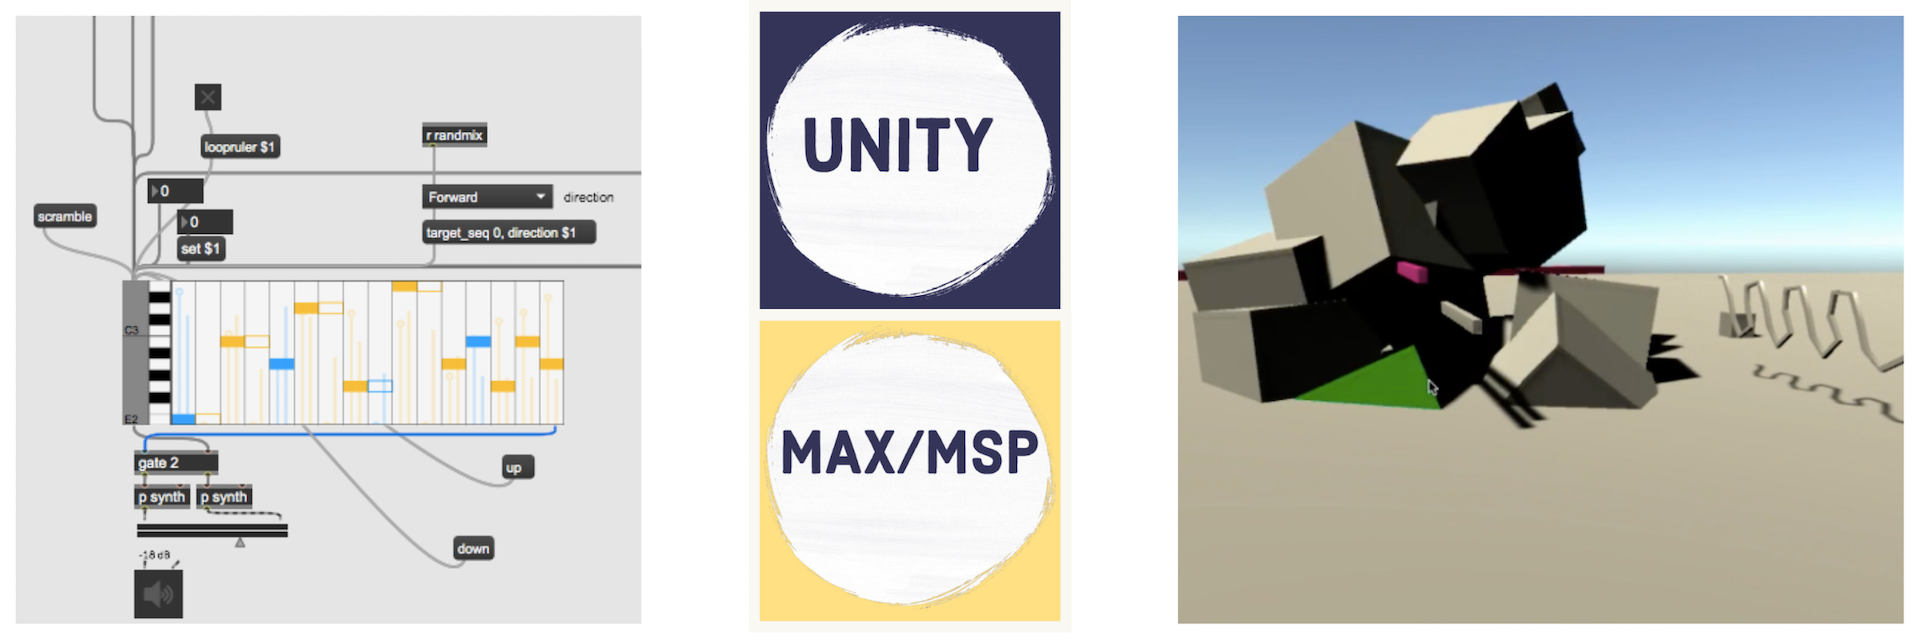 Max/MSP code and connection to Unity 3D rendering